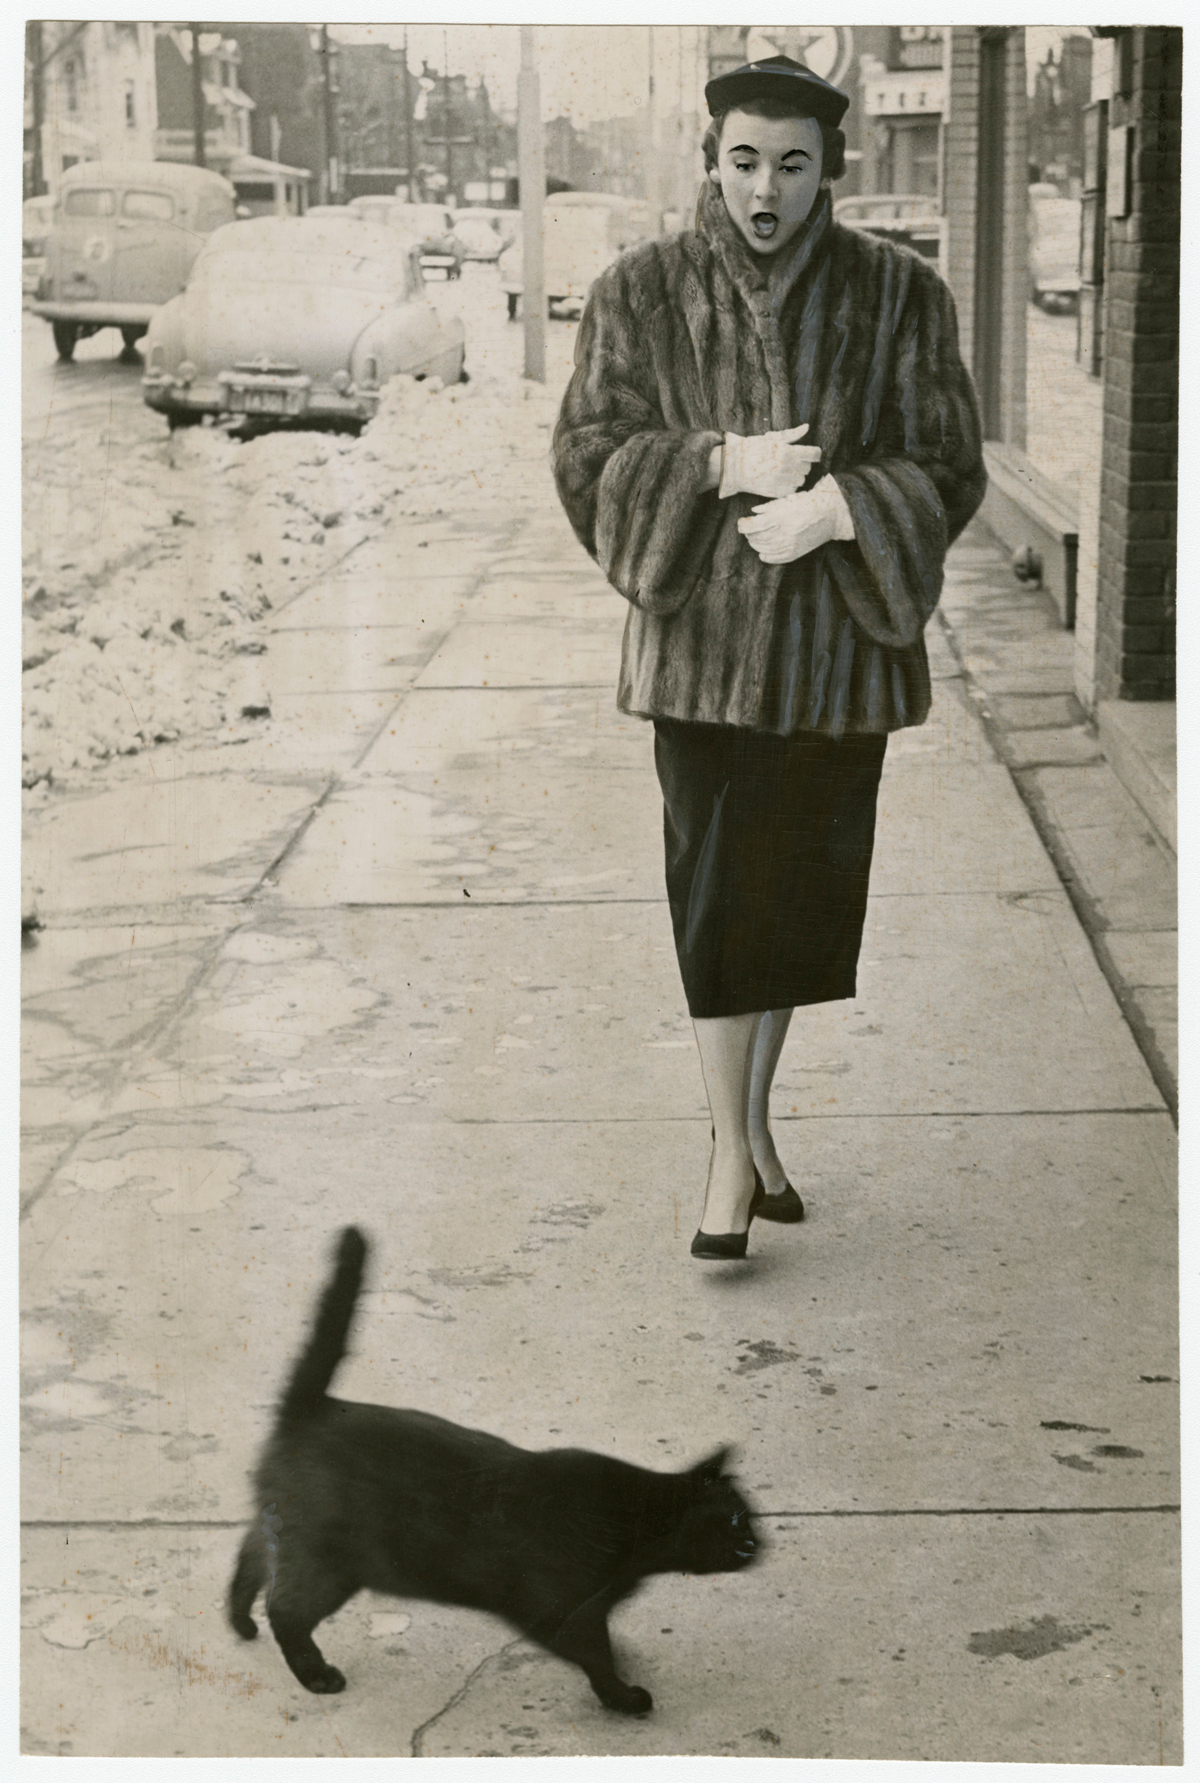     Unidentified photographer, To have a black cat cross your path at any time is unfortunate, but on Friday the 13th – oh, my! – which is just what Jean Craig said, 1953. Gelatin silver print, 9 x 6&#8243;. Gift of The Globe and Mail newspaper to the Canadian Photography Institute of the National Gallery of Canada.

